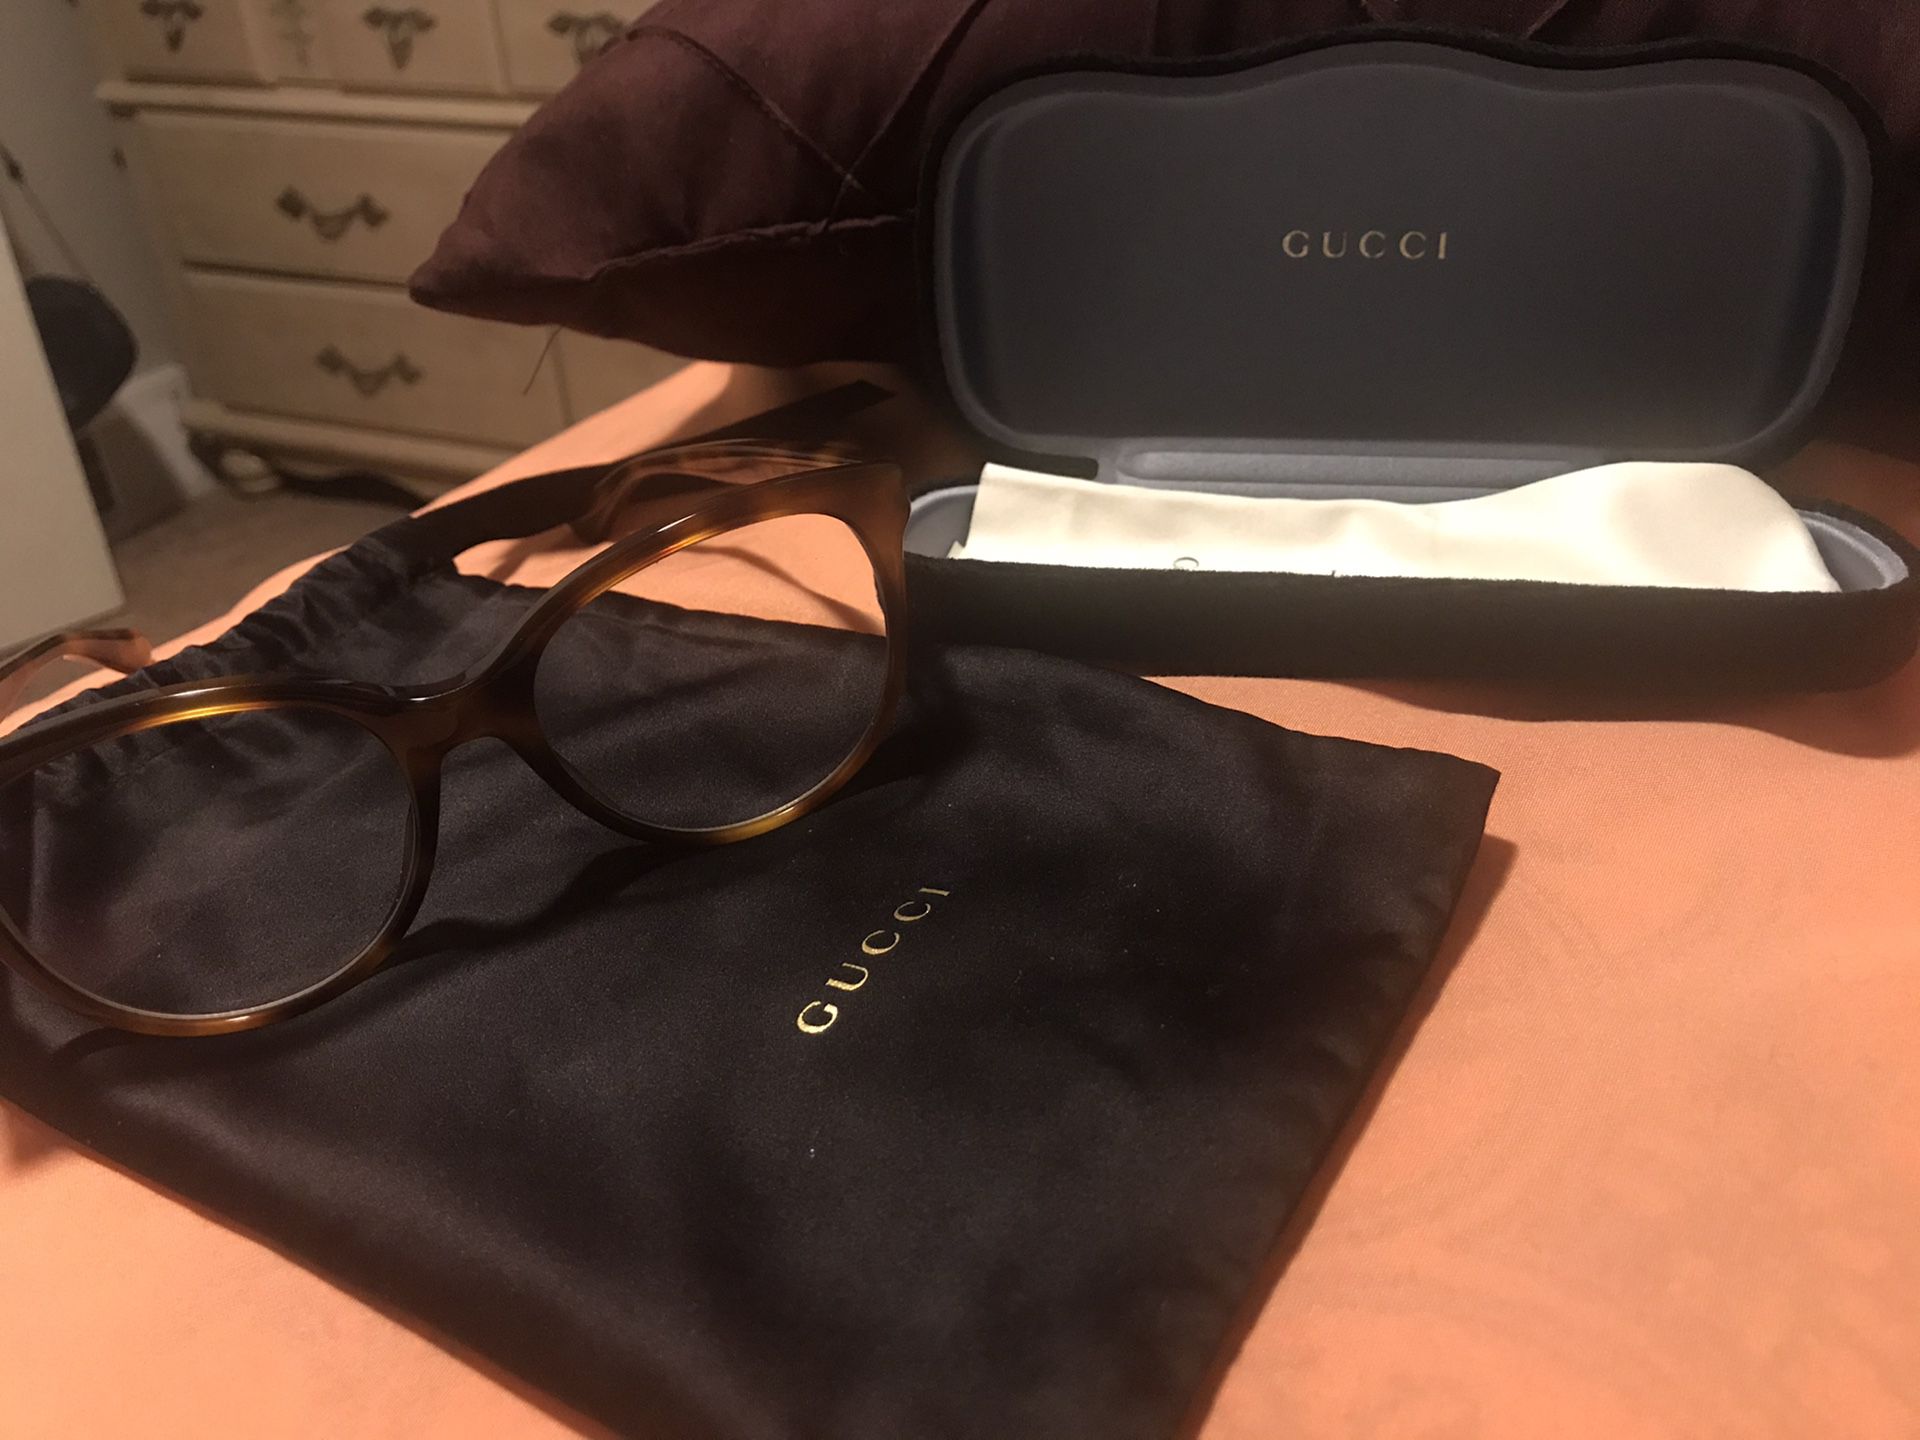 Gucci glasses with case & bag